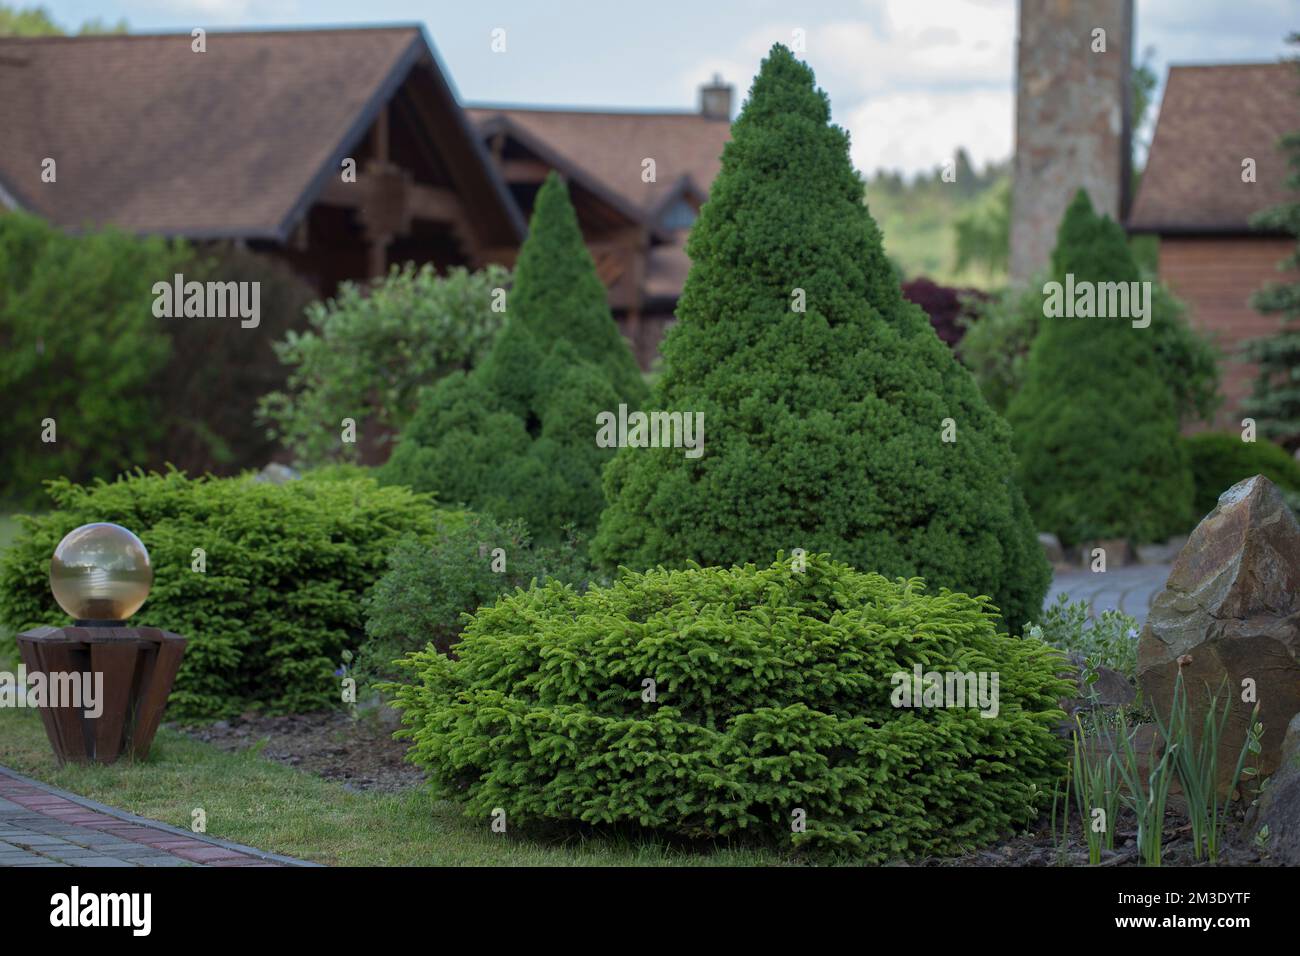 Modern unique landscape design. A group of decorative coniferous trees (Picea abies Nidiformis, Picea glauca Conica) and bushes against the background Stock Photo